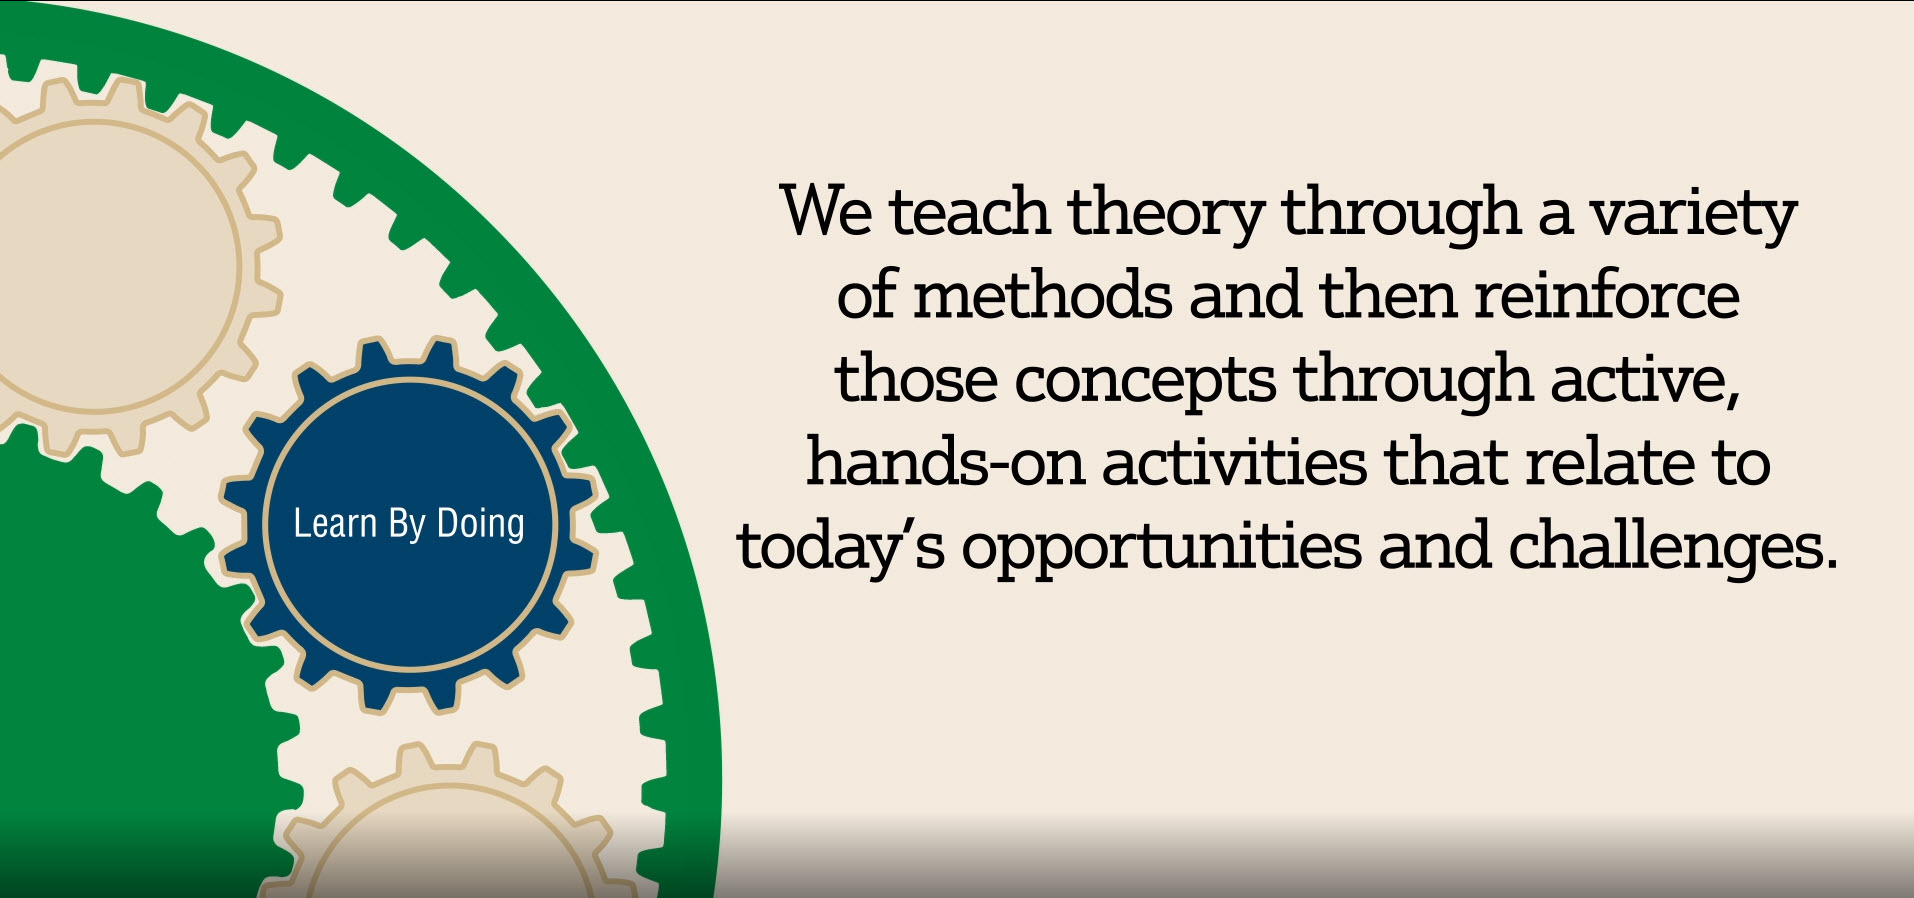 We teach theory through a variety of methods and then reinforce those concepts through active, hands-on activities that relate to today’s opportunities and challenges.